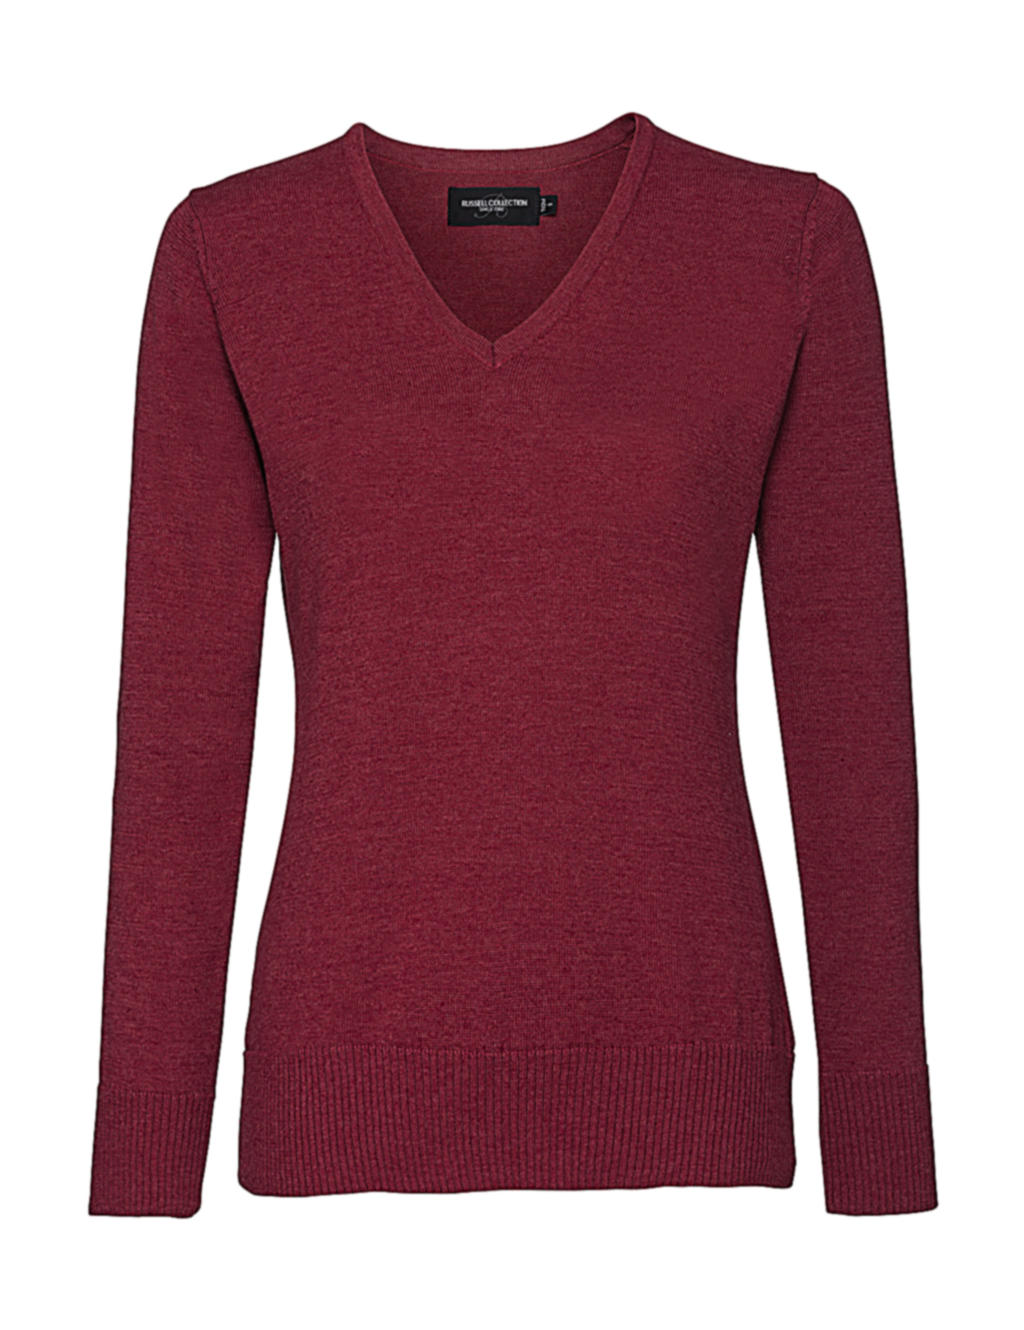  Ladies? V-Neck Knitted Pullover in Farbe Cranberry Marl